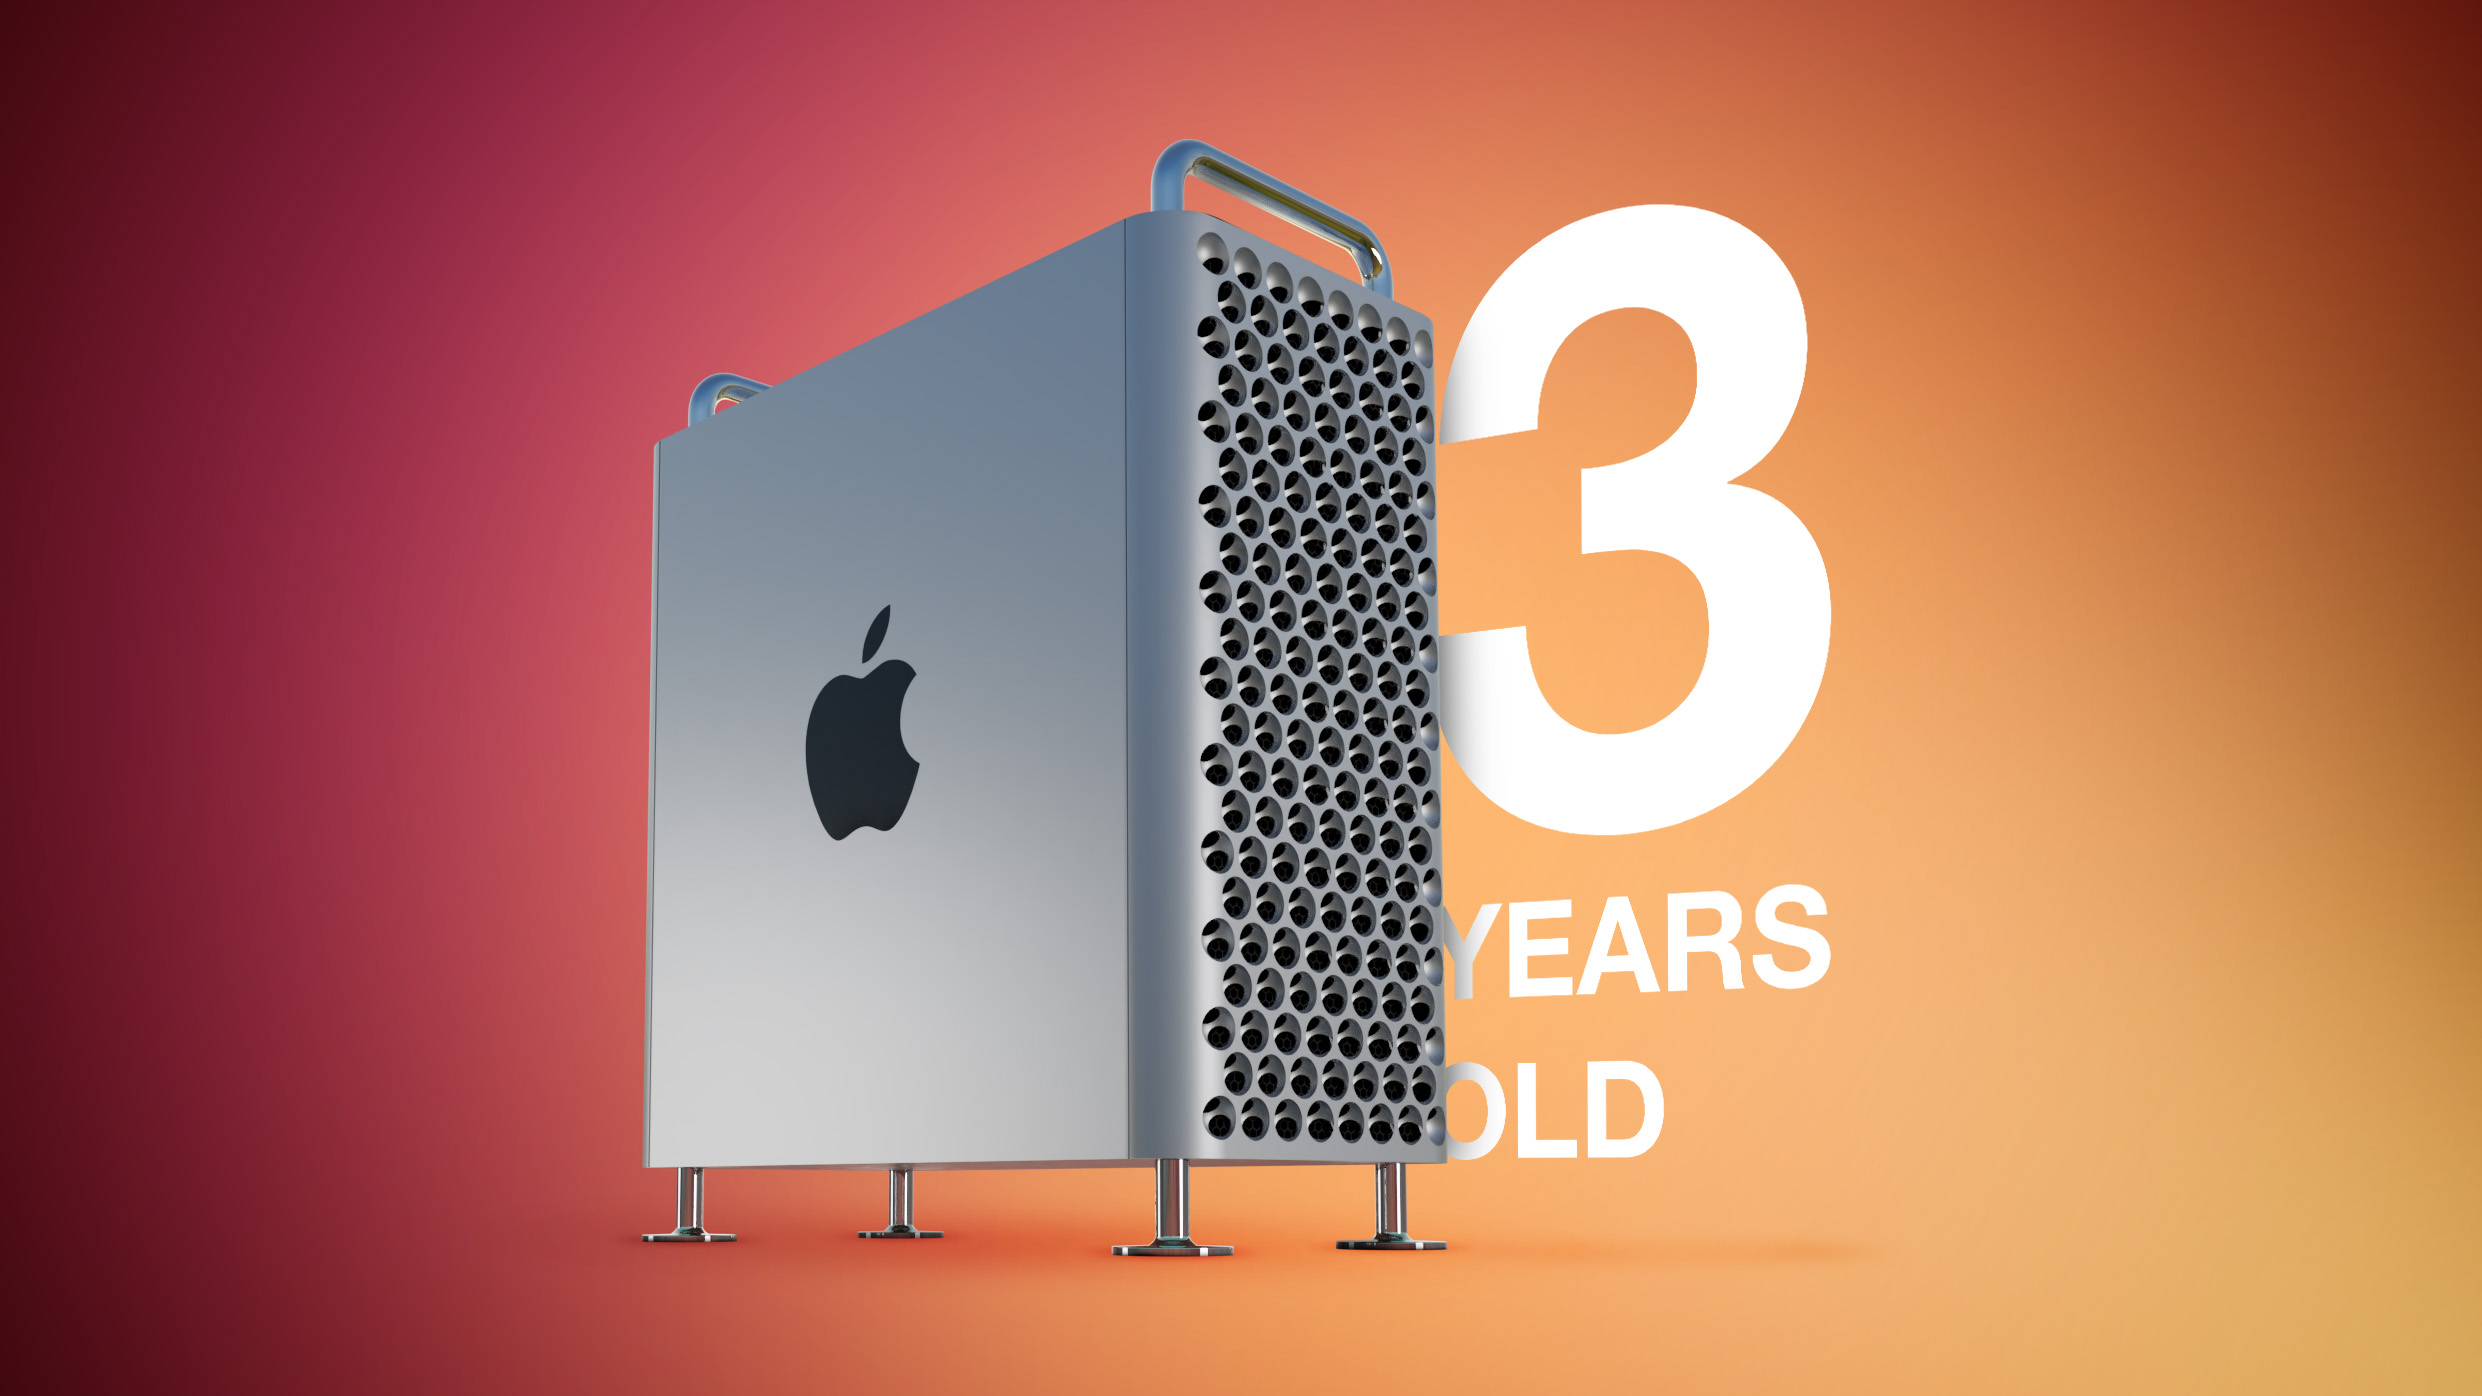 Gurman: All-New Mac Pro Still in Testing, But ‘M2 Extreme’ Chip Likely Canceled